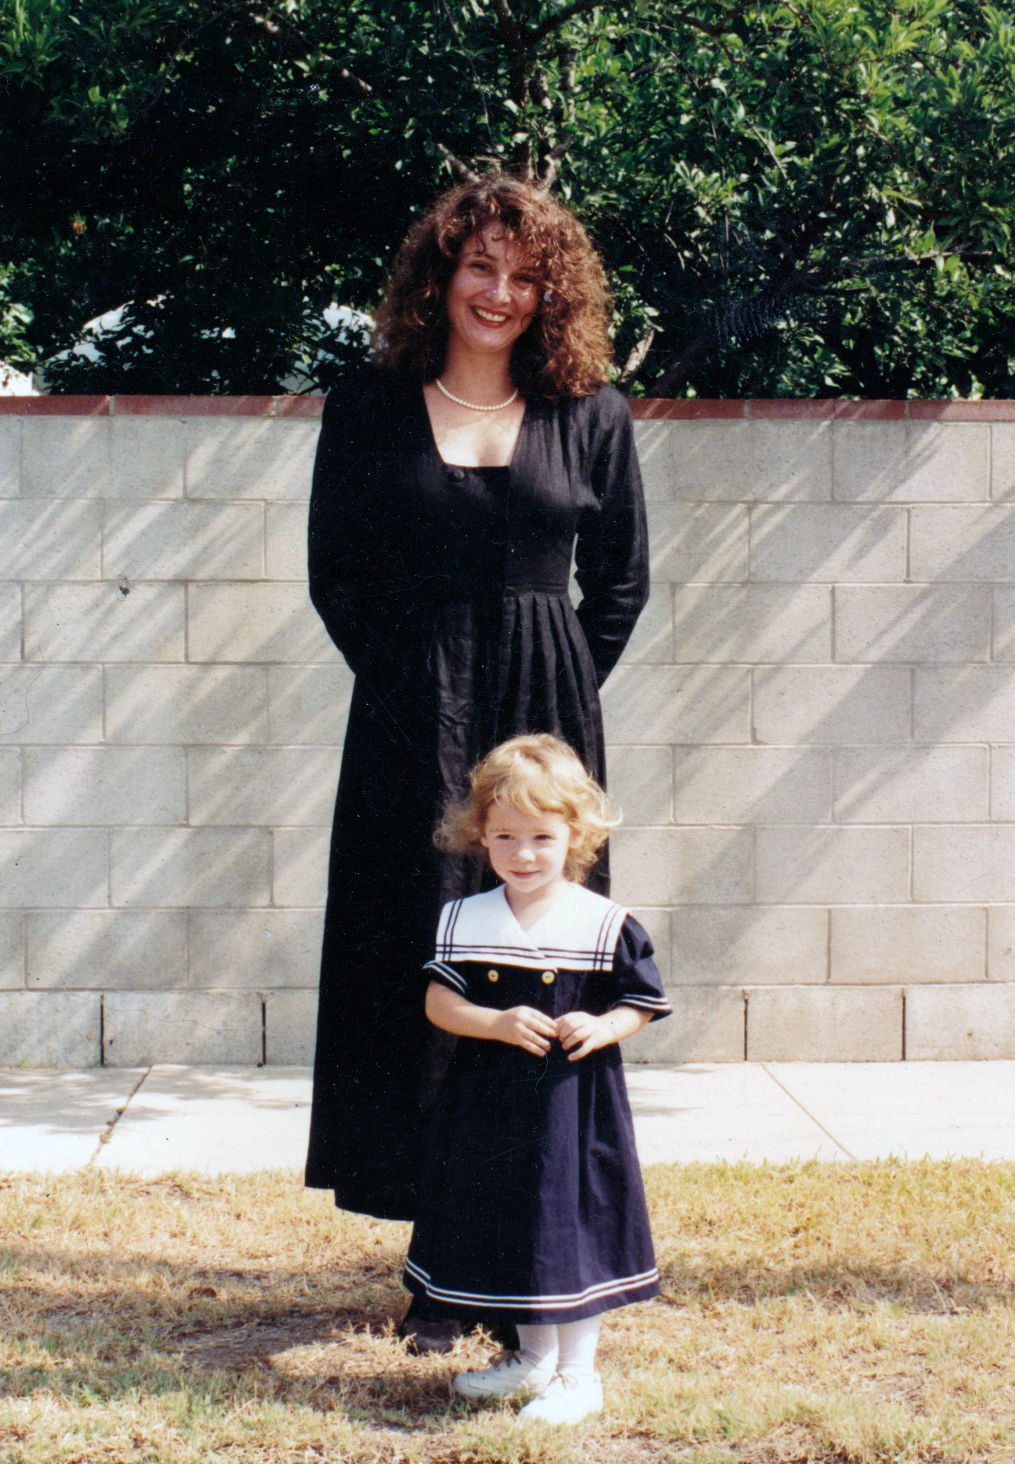 The Little Black Funeral Dress Five Things I Wish I Had Known About Grief 